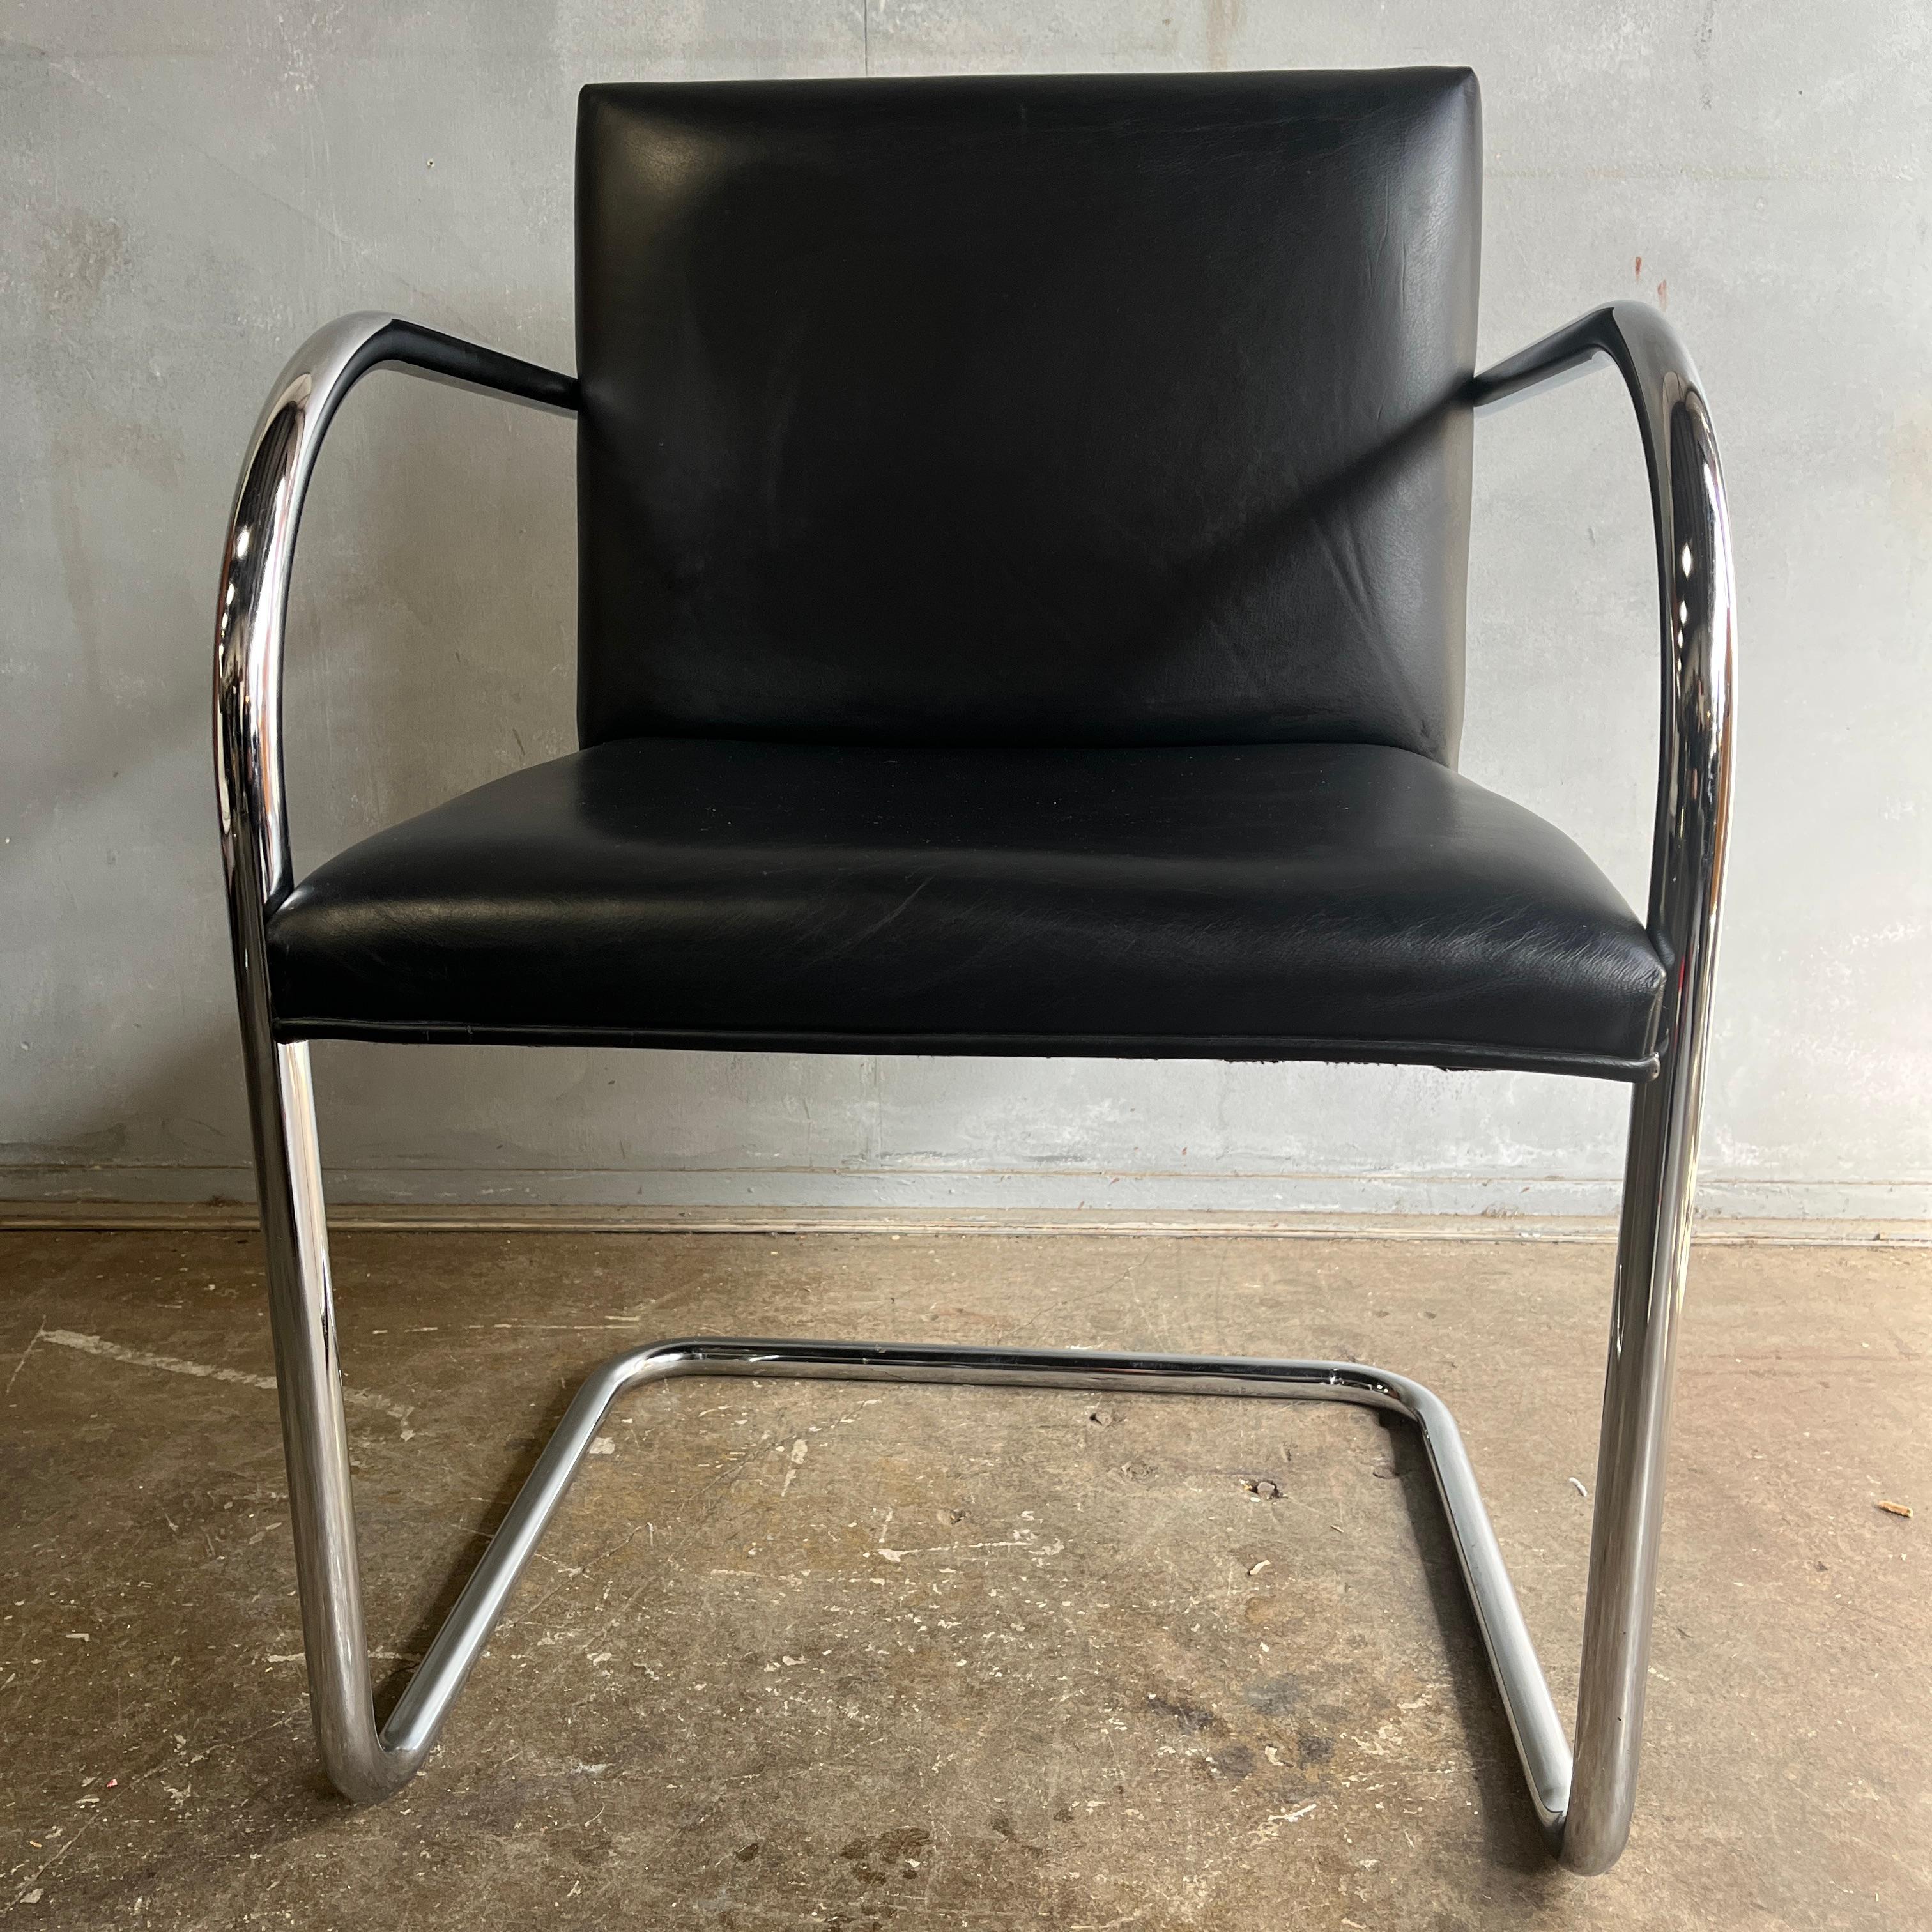 20th Century Midcentury Knoll Brno Chair by Mies Van Der Rohe